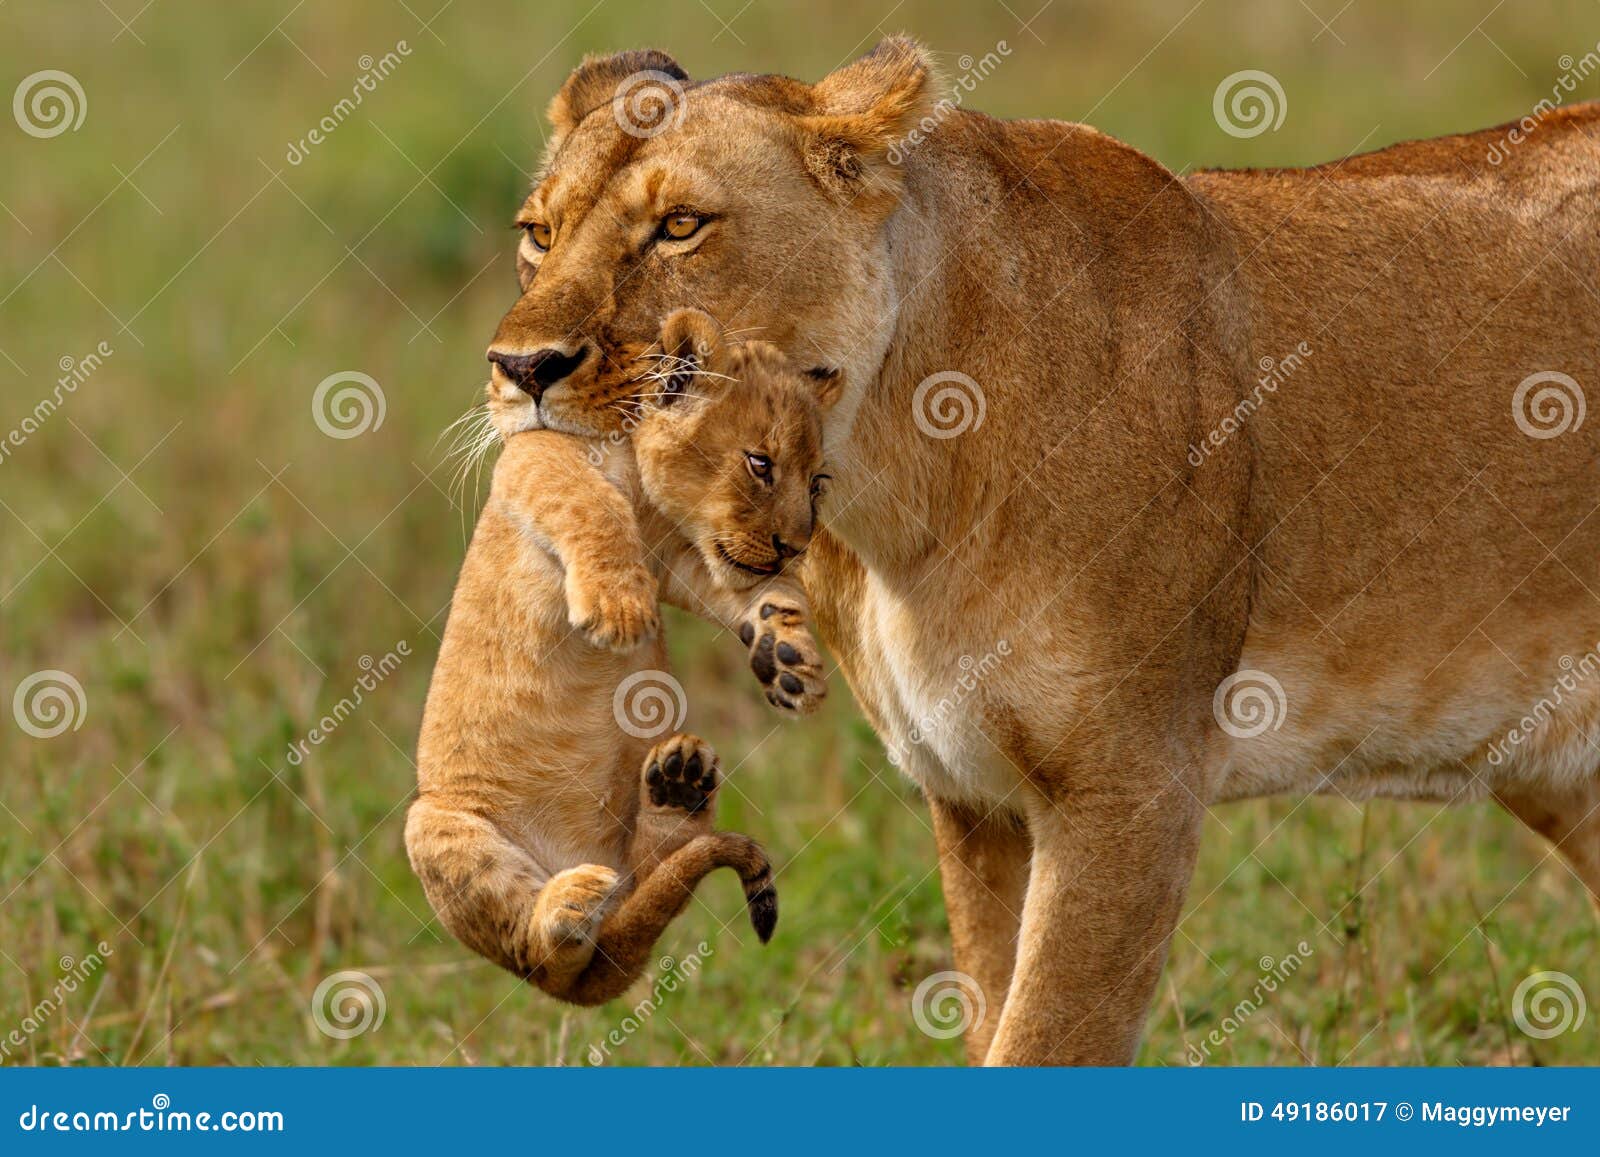 lioness mother carries her baby